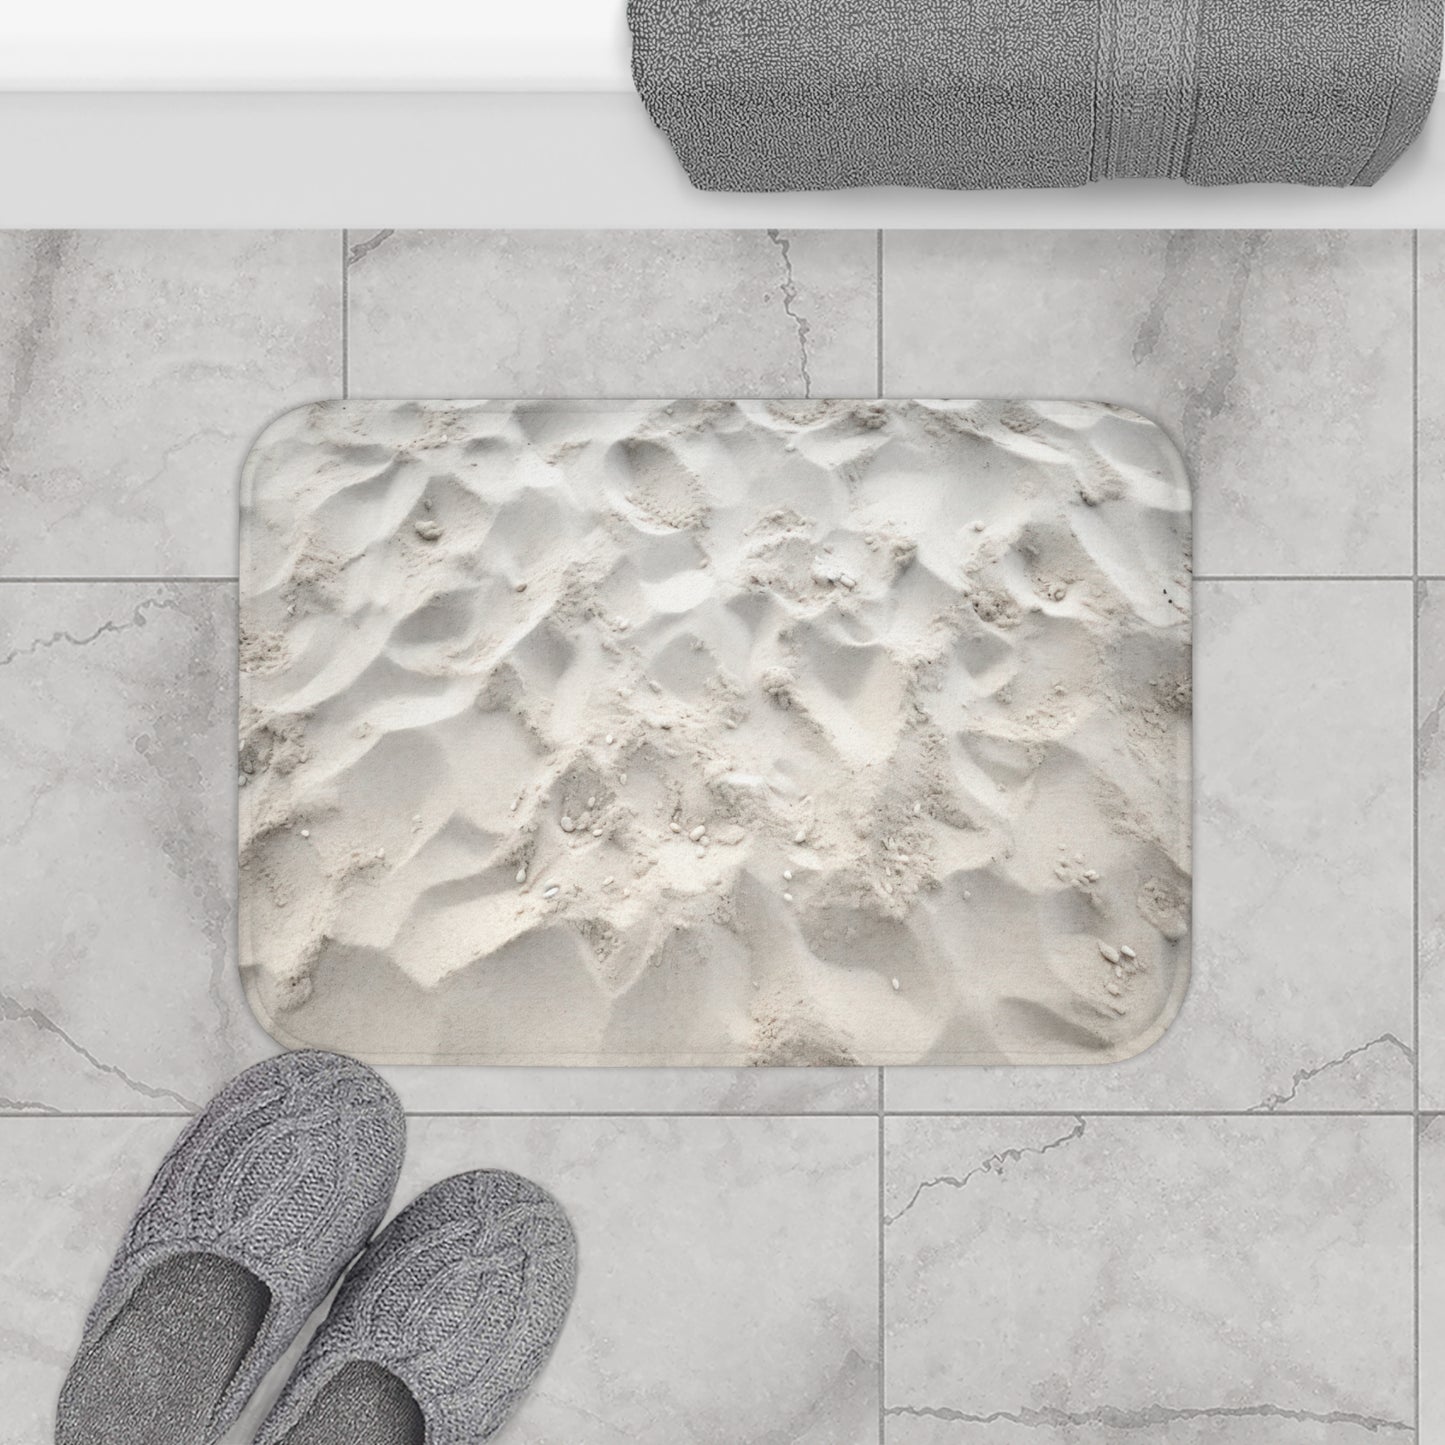 Transform your bathroom into a serene coastal retreat with Walking On Sand - Decor Bath Mat. The captivating white sand beach graphic, crafted from durable 100% microfiber, creates a tranquil haven. Its anti-slip backside ensures stability and the detailed binding guarantees long-lasting quality.